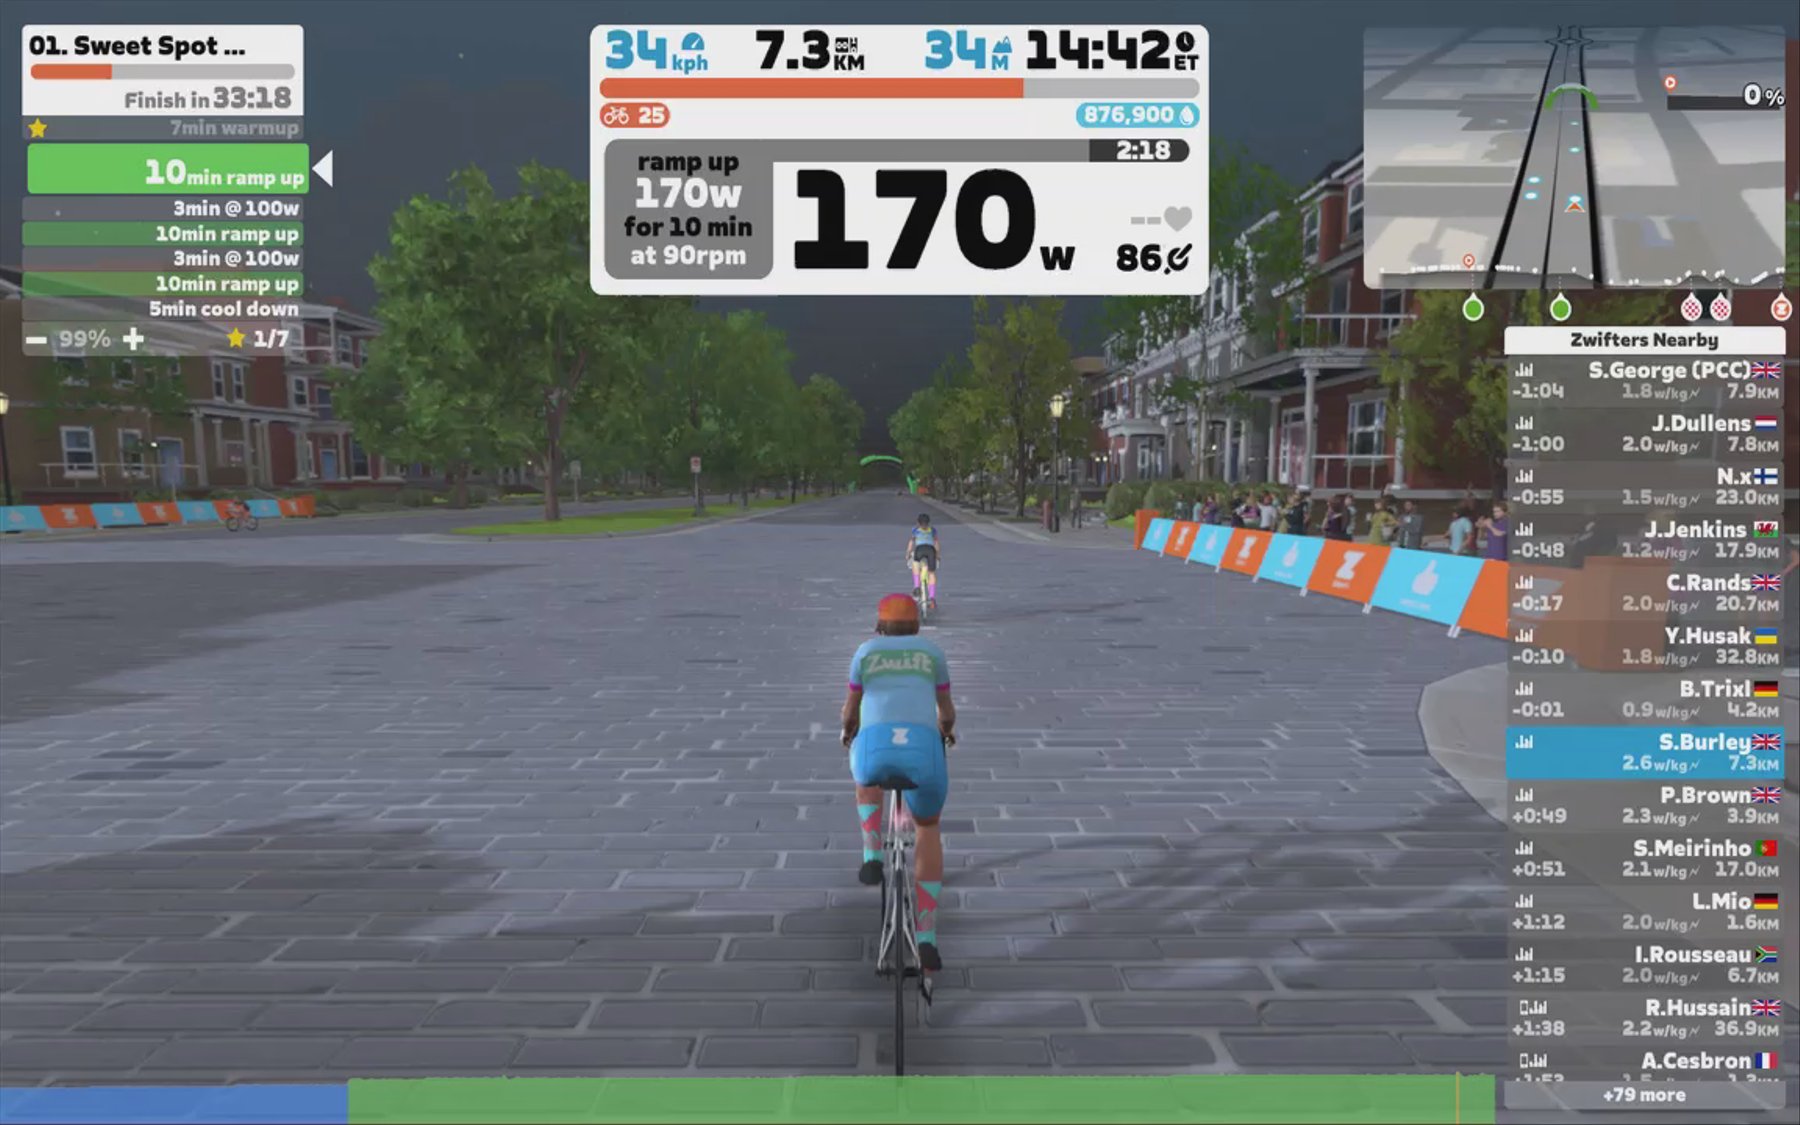 Zwift - 01. Sweet Spot Foundation on Countryside Tour in Richmond